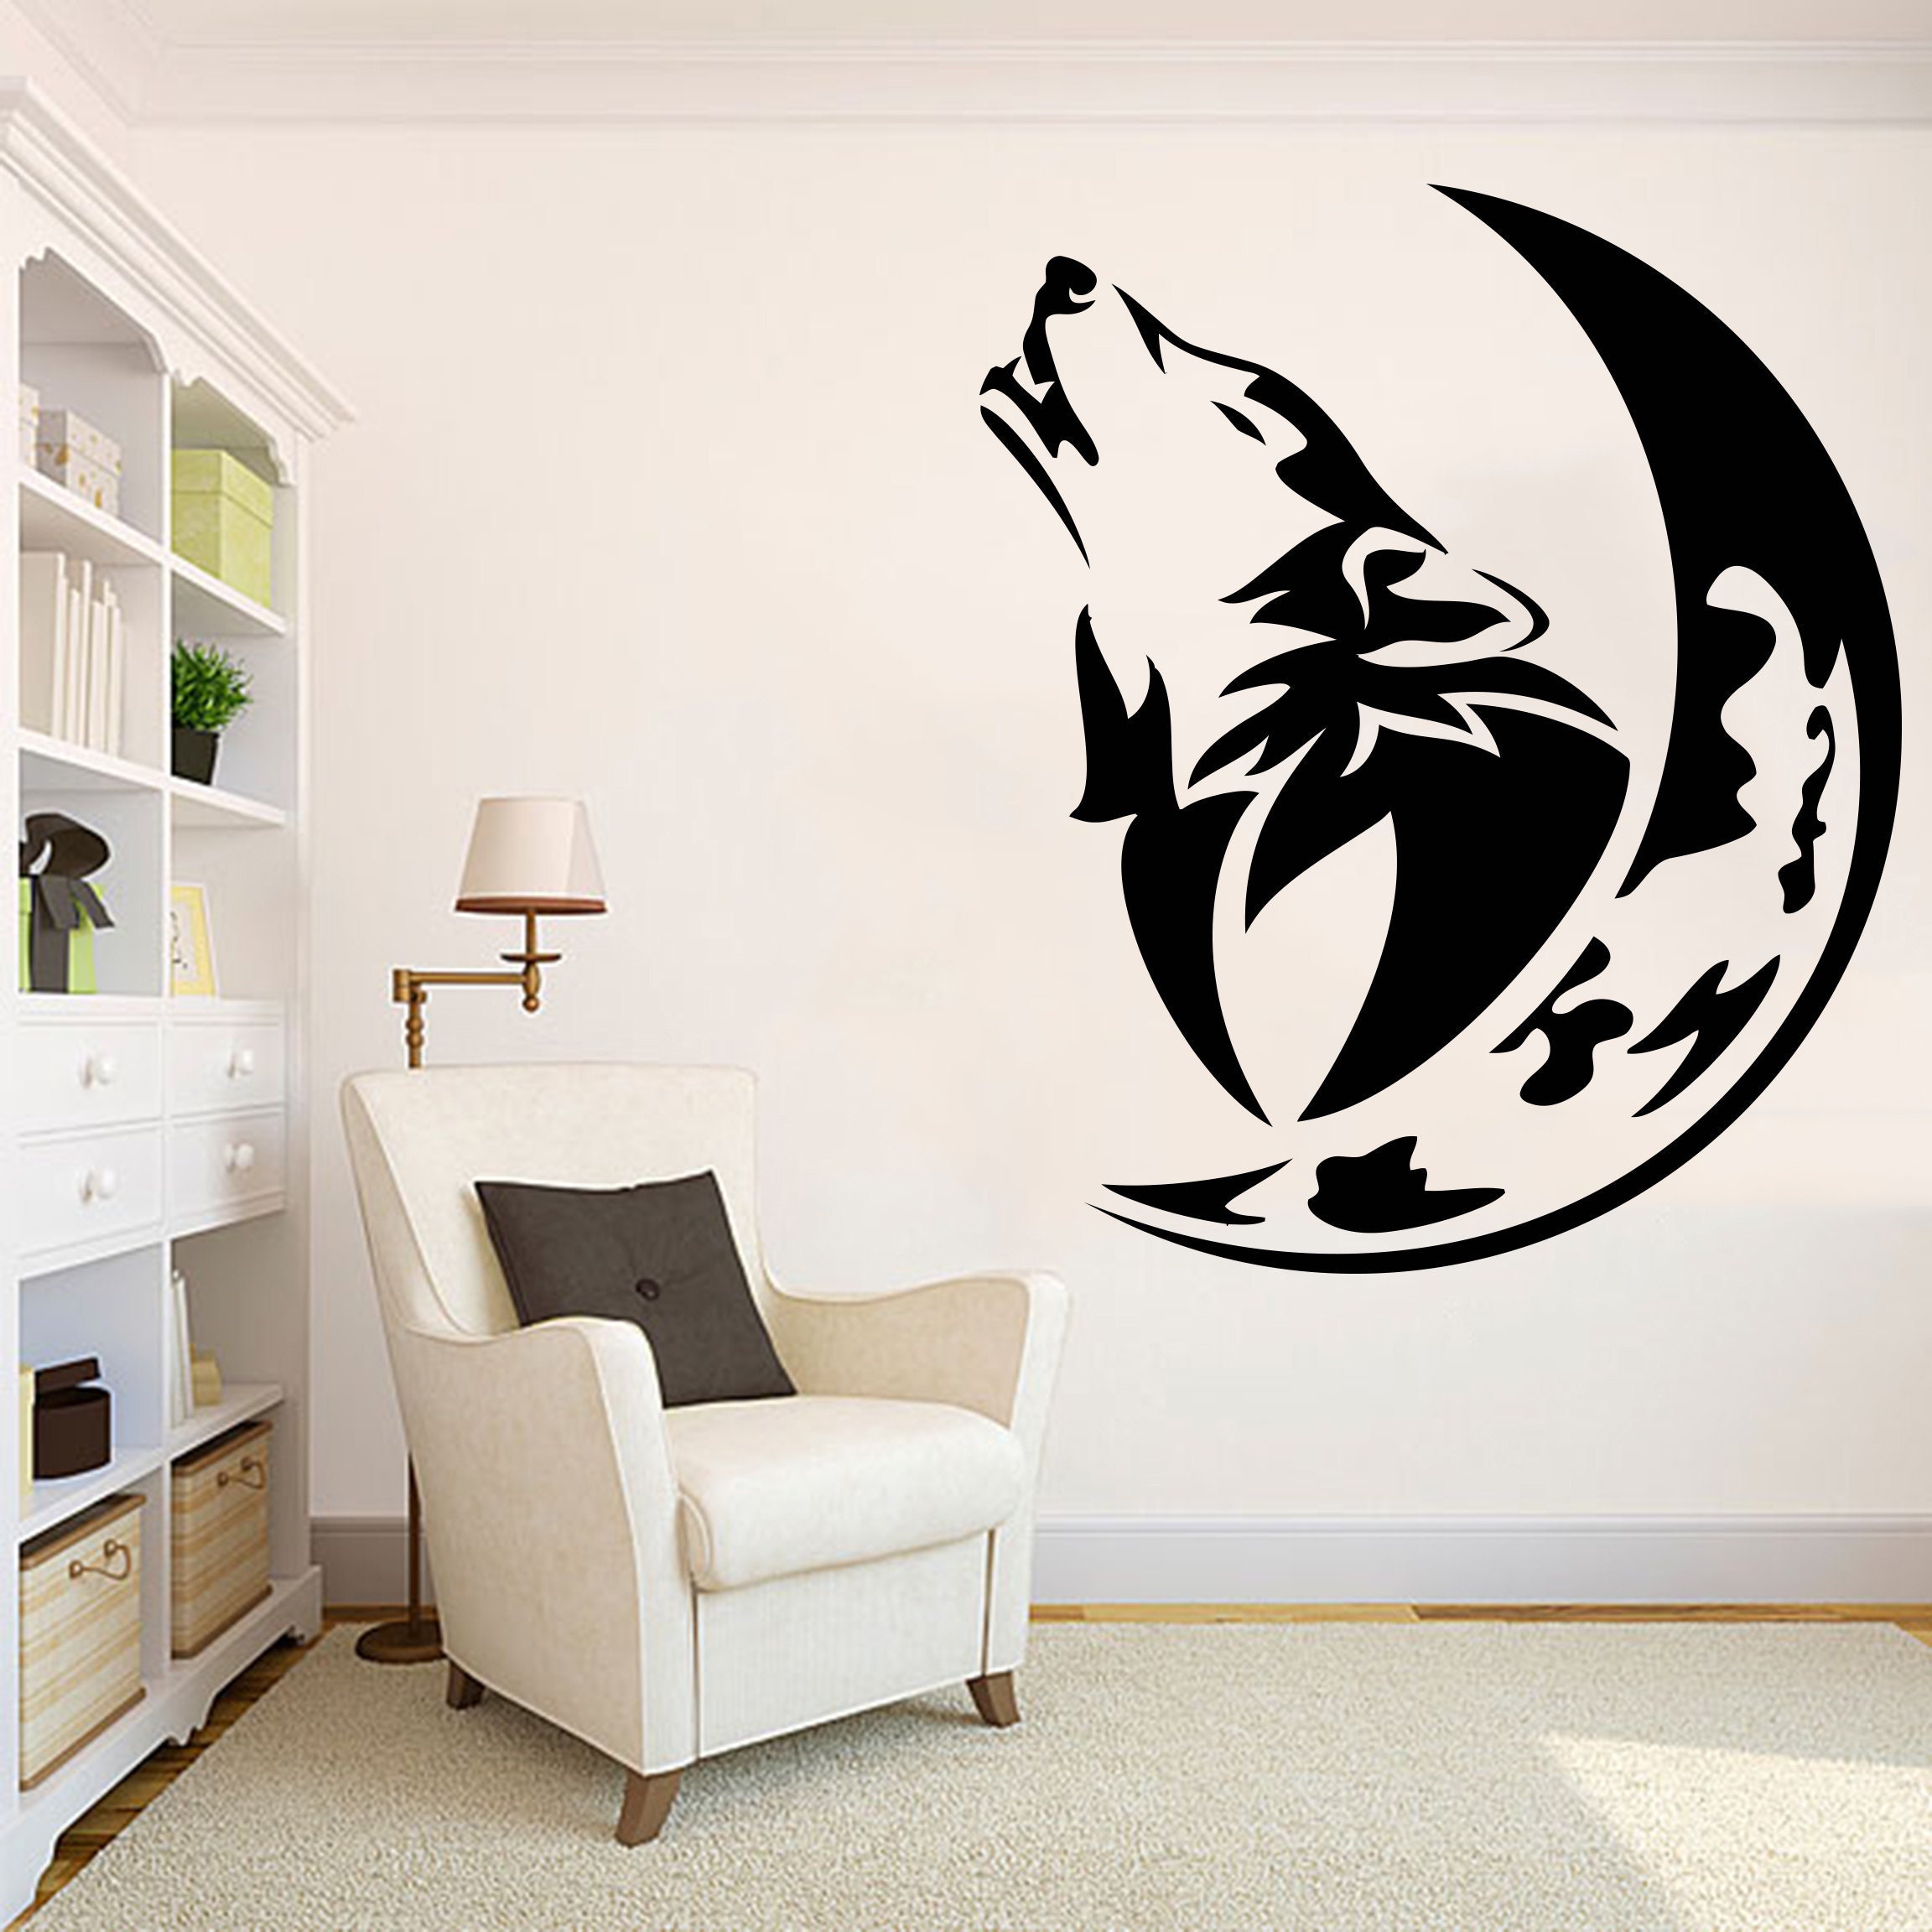 Wall Decal Wolf Moon Sticker Decor Art Room Howling Home Animal Free Shipping